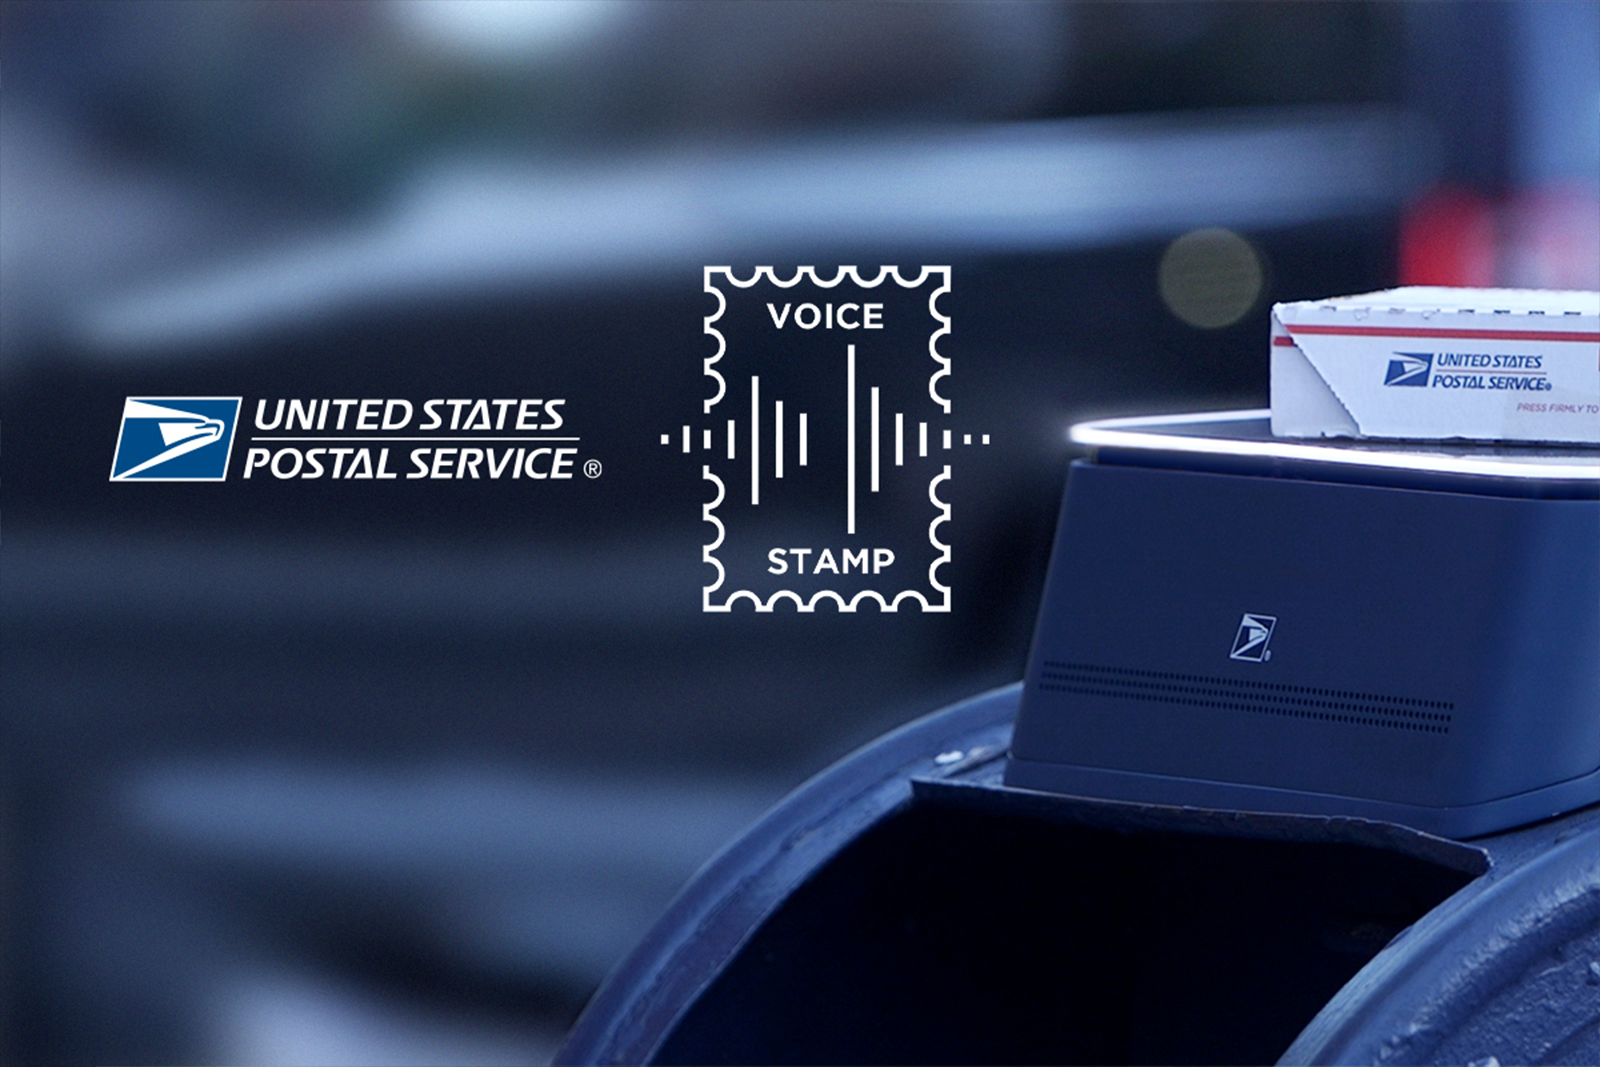 Blue postal service mailbox with package on top and Voice Stamp logo